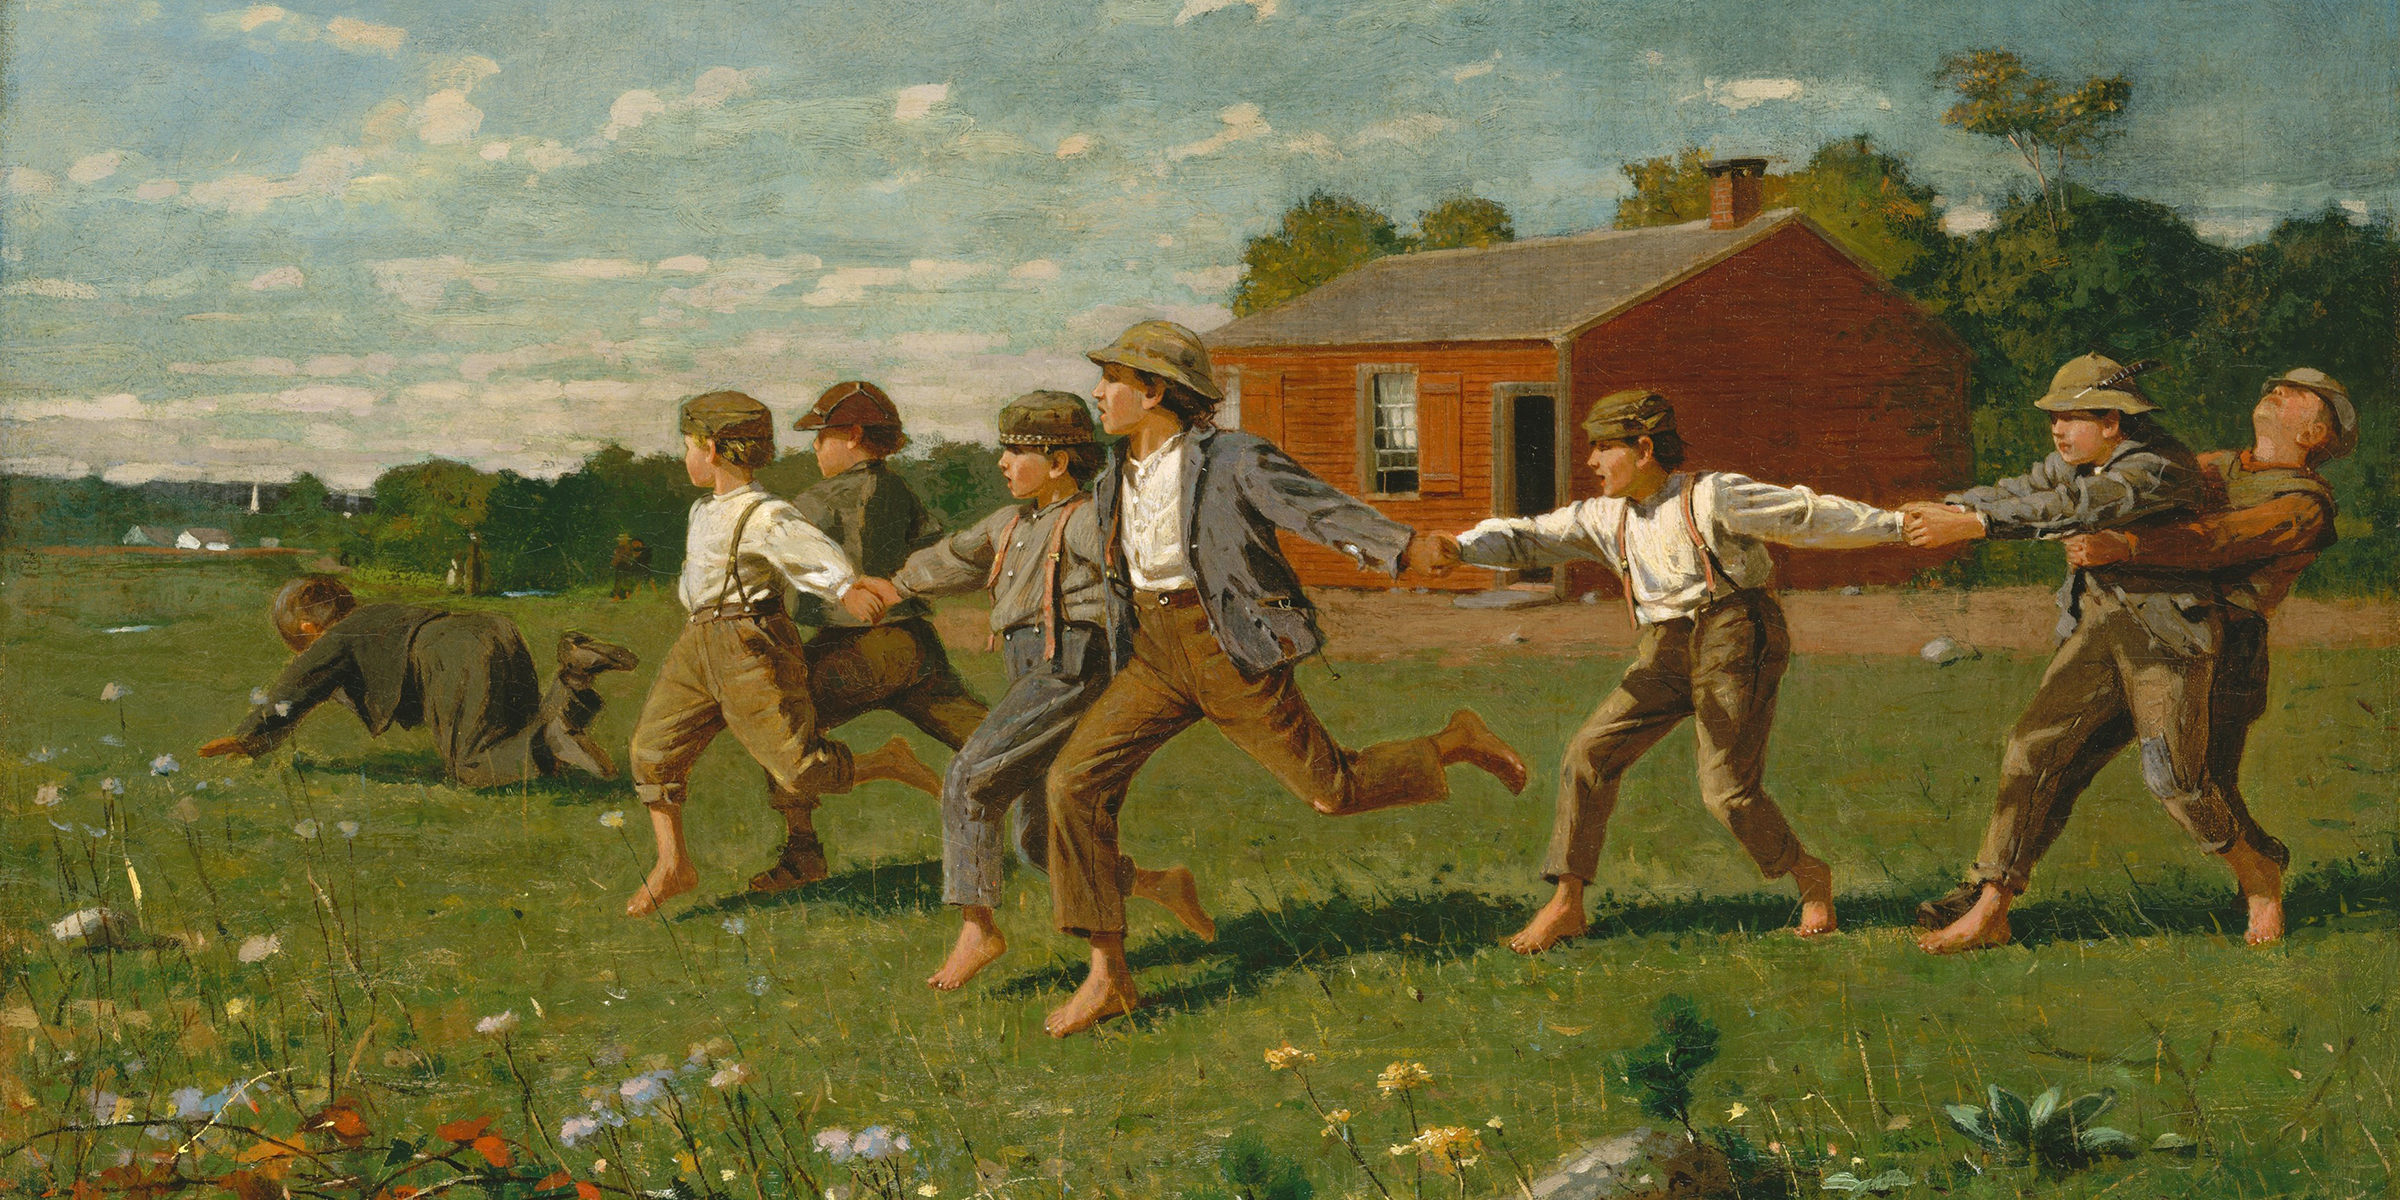 Snap the Whip (detail), by Winslow Homer, 1872.